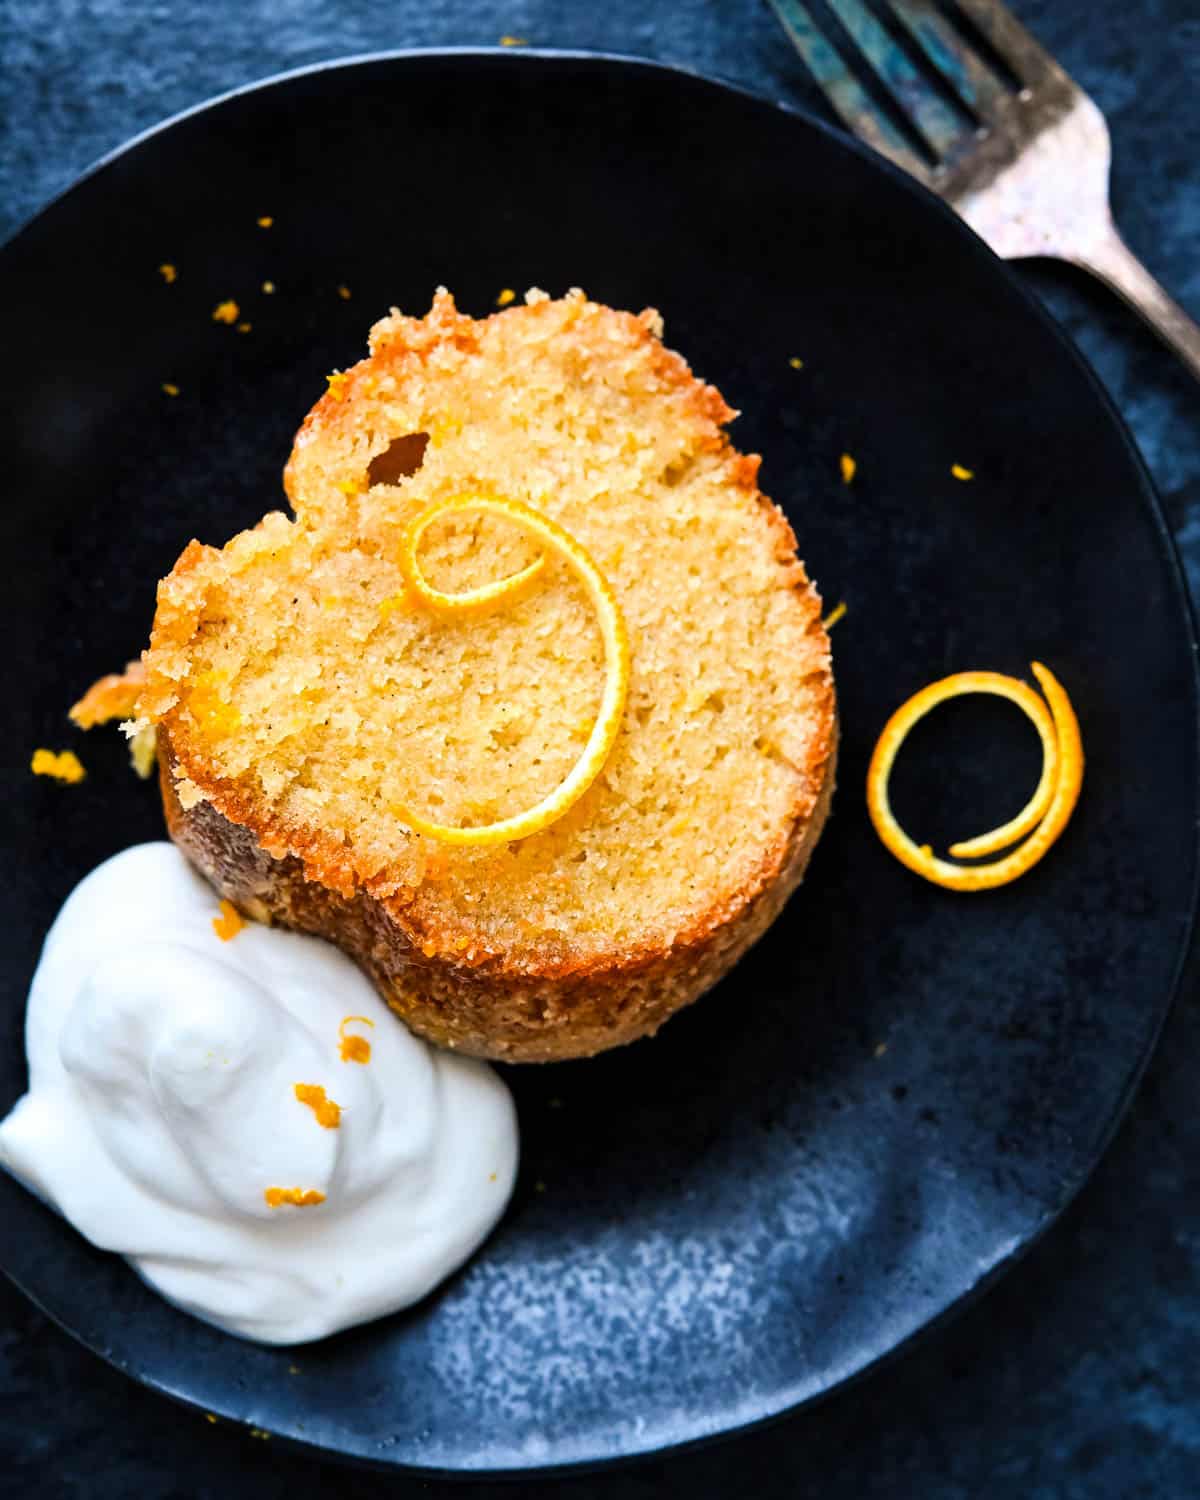 A slice of whiskey cake with orange peel and whipped cream.